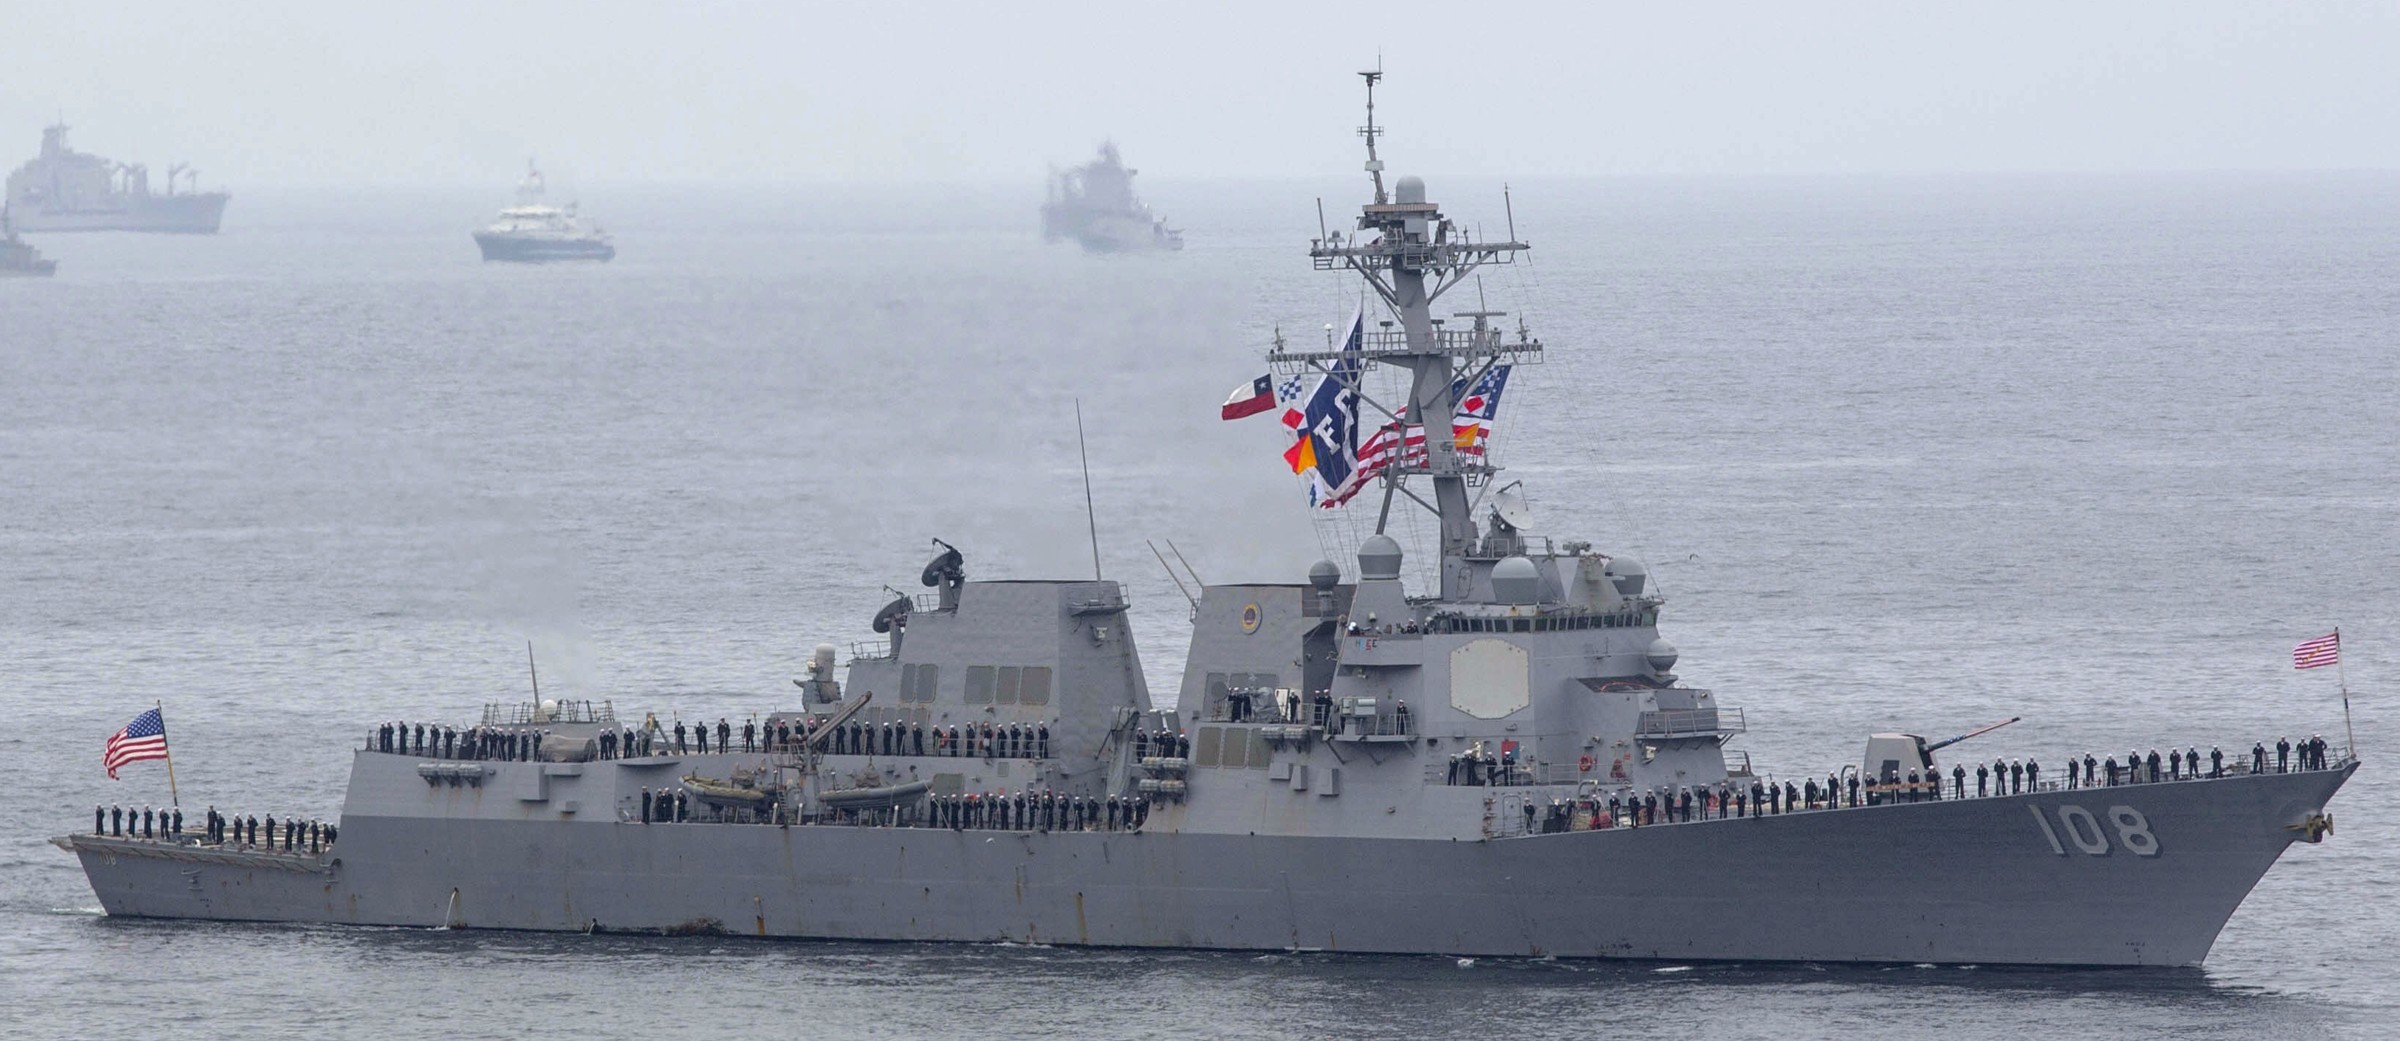 ddg-108 uss wayne e. meyer arleigh burke class guided missile destroyer aegis us navy off chile 56